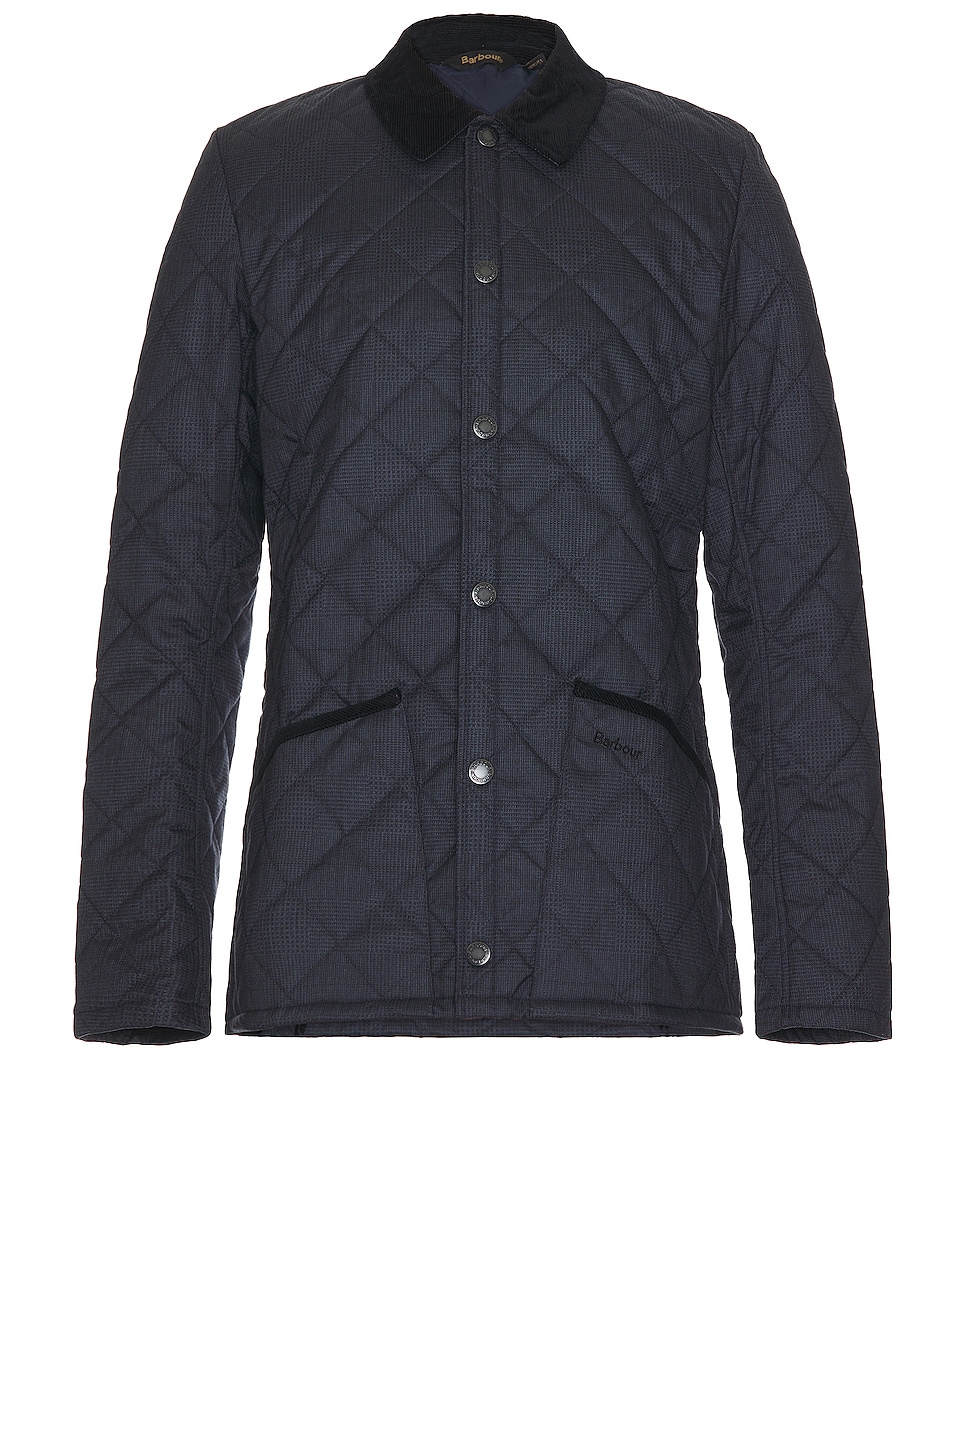 Image 1 of Barbour Checked Heritage Liddesdale Quilt Jacket in Navy